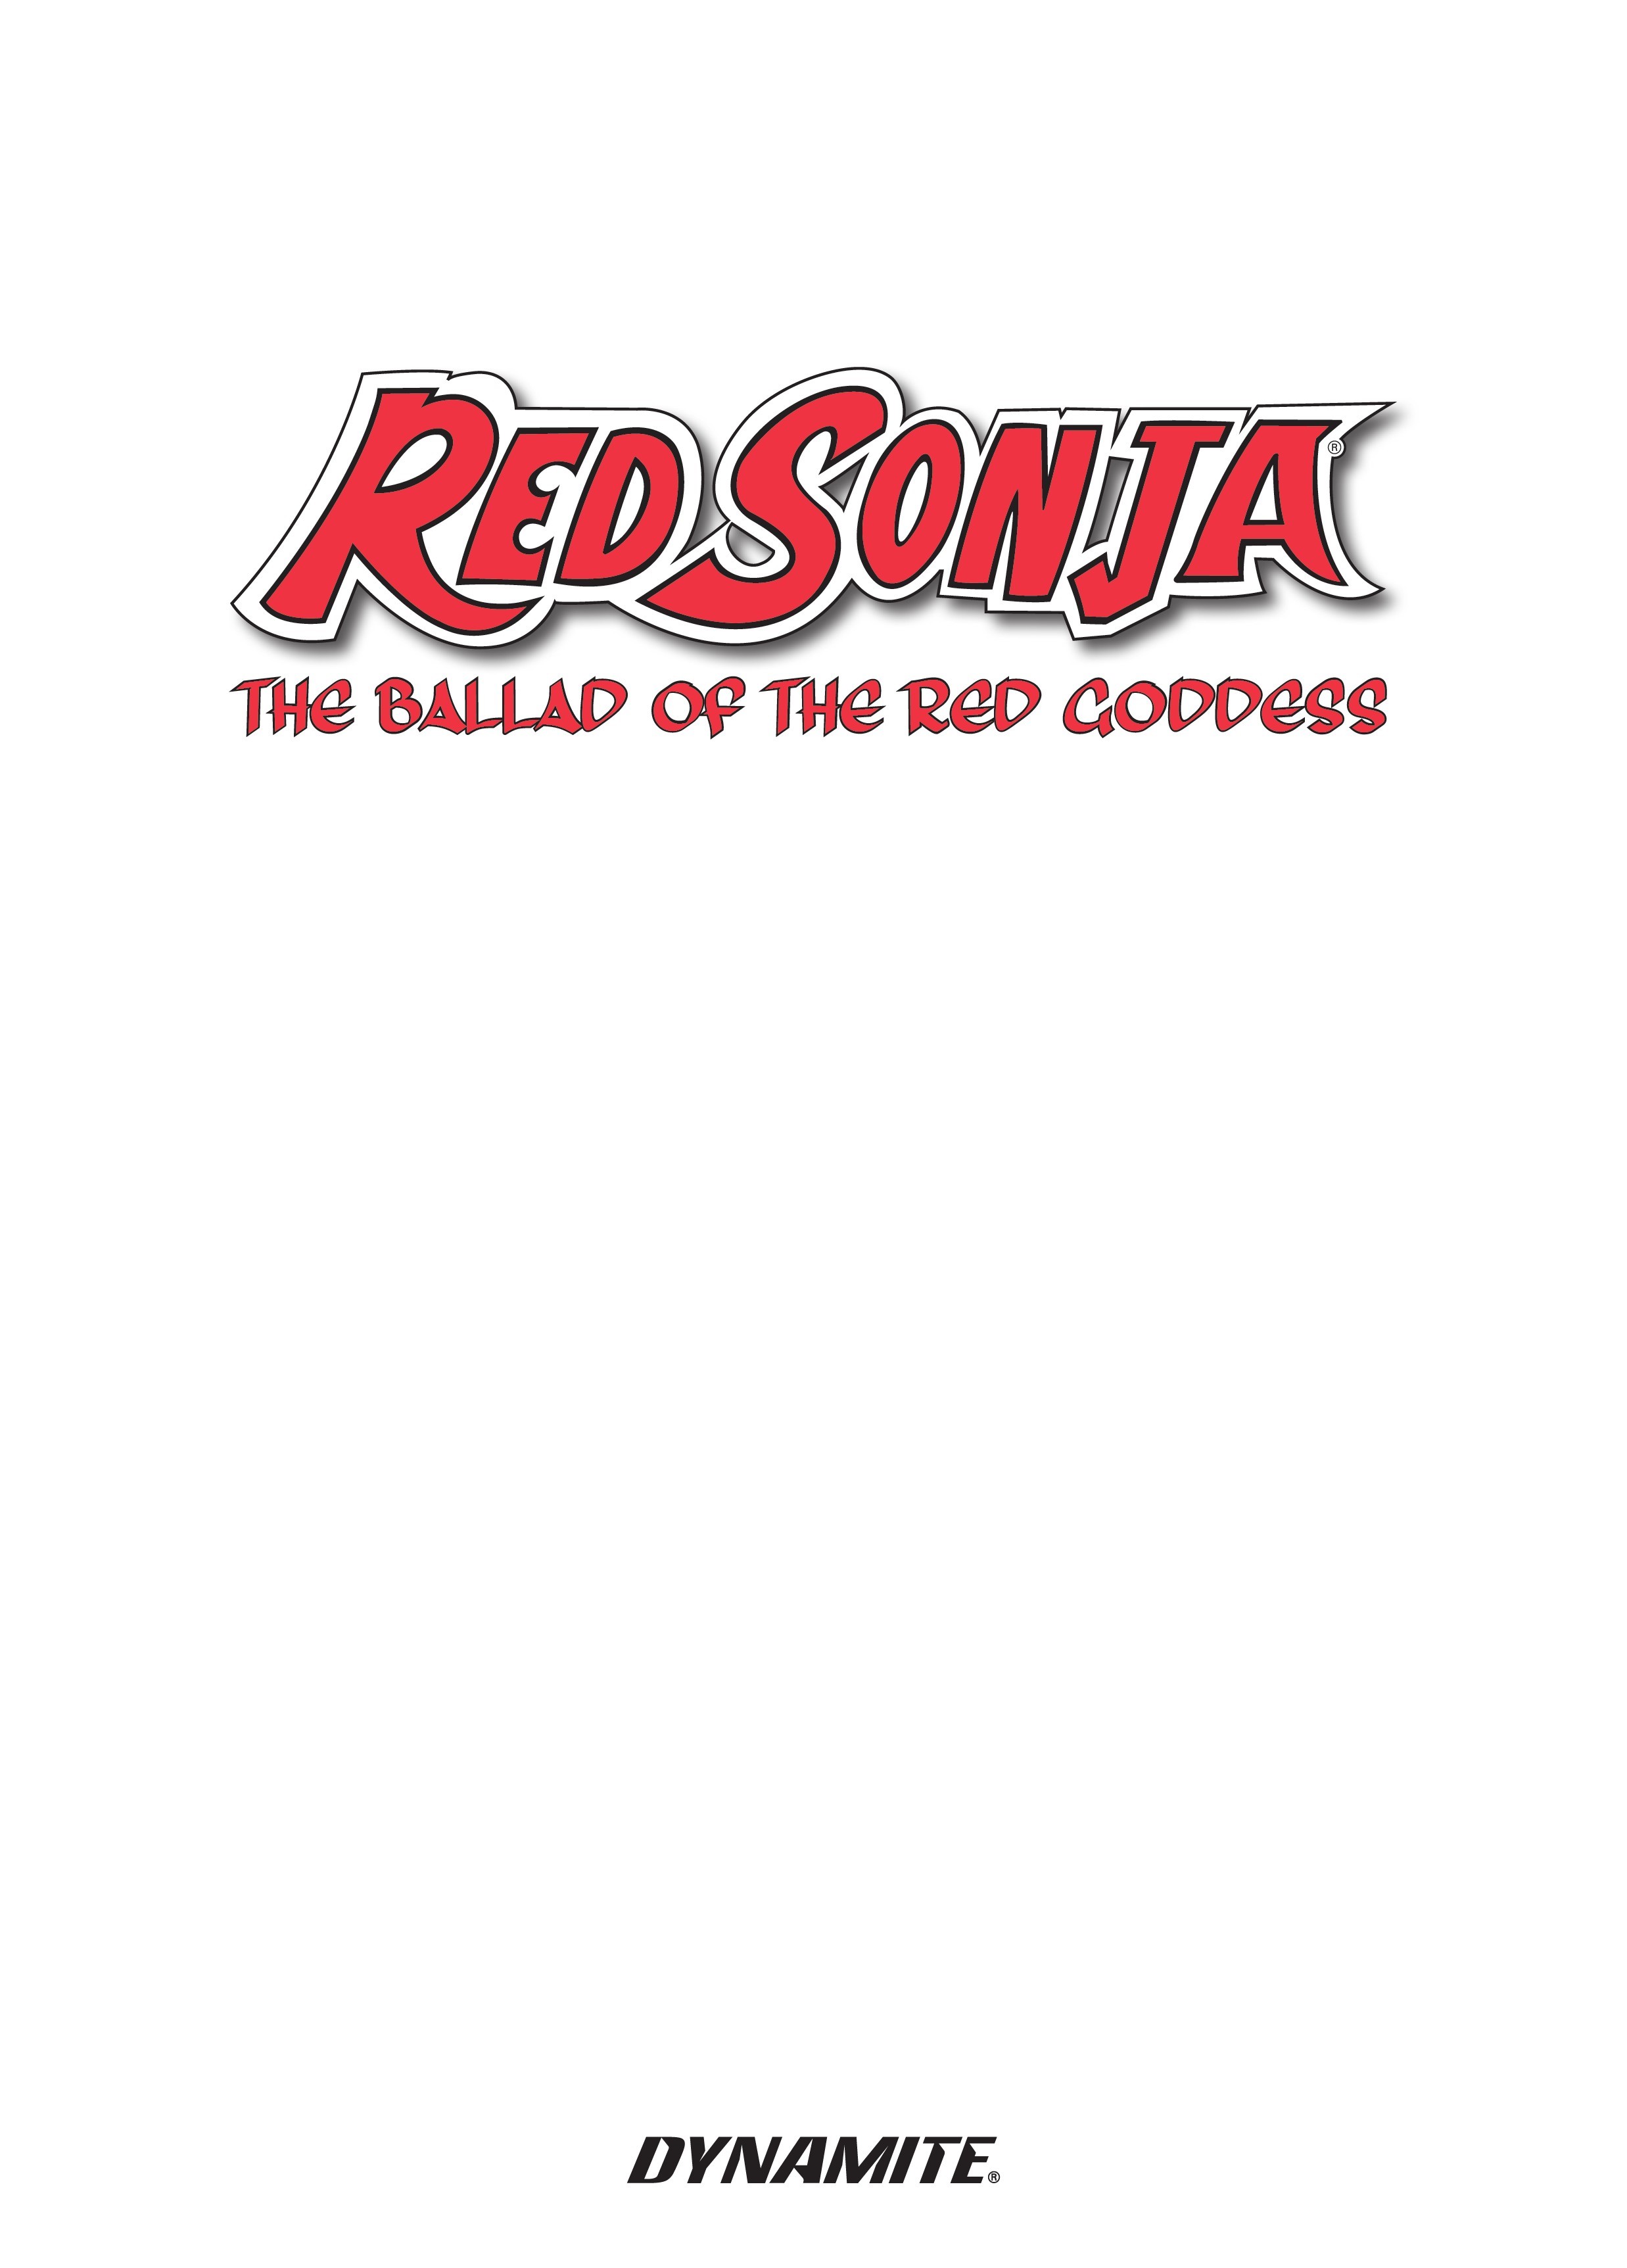 Read online Red Sonja: Ballad of the Red Goddess comic -  Issue # TPB - 5